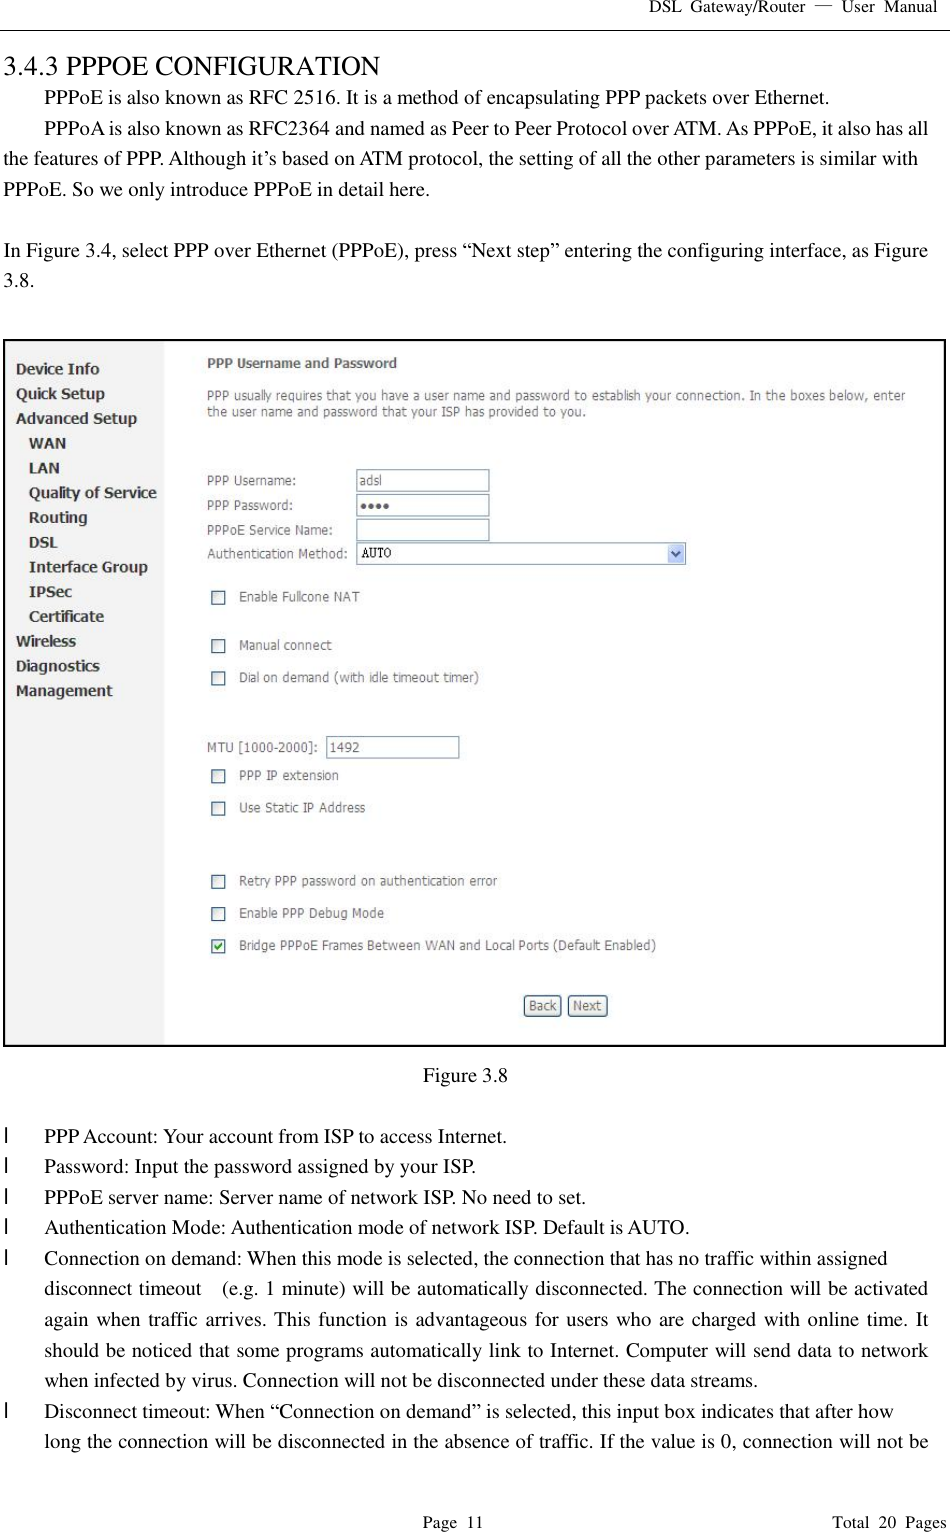 DSL Gateway/Router  — User Manual  Page 11                                       Total 20 Pages 3.4.3 PPPOE CONFIGURATION PPPoE is also known as RFC 2516. It is a method of encapsulating PPP packets over Ethernet. PPPoA is also known as RFC2364 and named as Peer to Peer Protocol over ATM. As PPPoE, it also has all the features of PPP. Although it’s based on ATM protocol, the setting of all the other parameters is similar with PPPoE. So we only introduce PPPoE in detail here.   In Figure 3.4, select PPP over Ethernet (PPPoE), press “Next step” entering the configuring interface, as Figure 3.8.   Figure 3.8  l  PPP Account: Your account from ISP to access Internet. l  Password: Input the password assigned by your ISP. l  PPPoE server name: Server name of network ISP. No need to set. l  Authentication Mode: Authentication mode of network ISP. Default is AUTO. l  Connection on demand: When this mode is selected, the connection that has no traffic within assigned disconnect timeout  (e.g. 1 minute) will be automatically disconnected. The connection will be activated again when traffic arrives. This function is advantageous for users who are charged with online time. It should be noticed that some programs automatically link to Internet. Computer will send data to network when infected by virus. Connection will not be disconnected under these data streams. l  Disconnect timeout: When “Connection on demand” is selected, this input box indicates that after how  long the connection will be disconnected in the absence of traffic. If the value is 0, connection will not be 